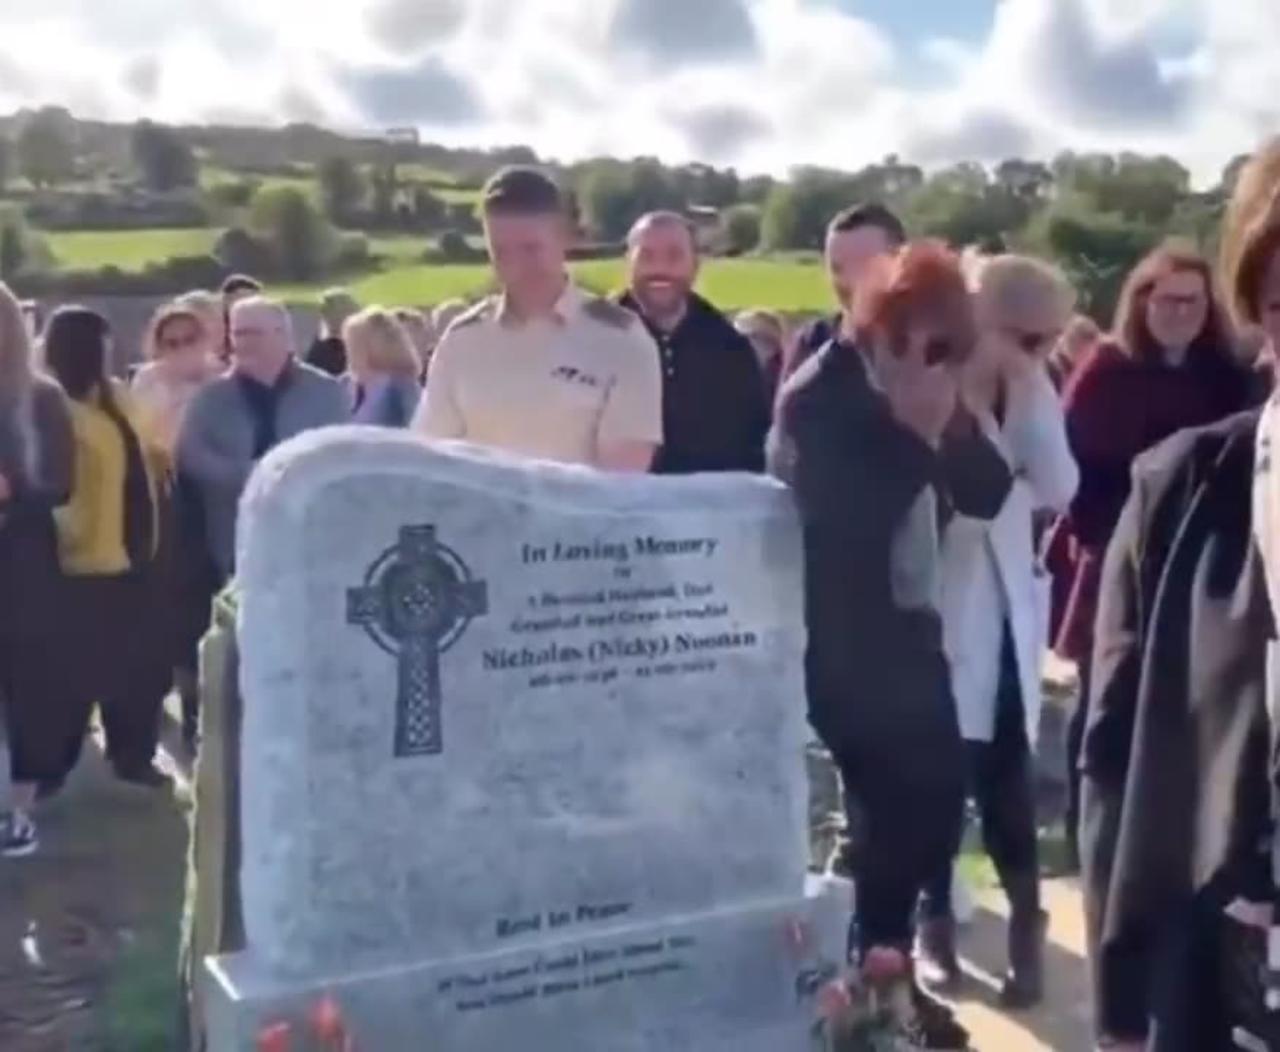 An Irishman had the last laugh at his funeral with a gag from beyond the grave